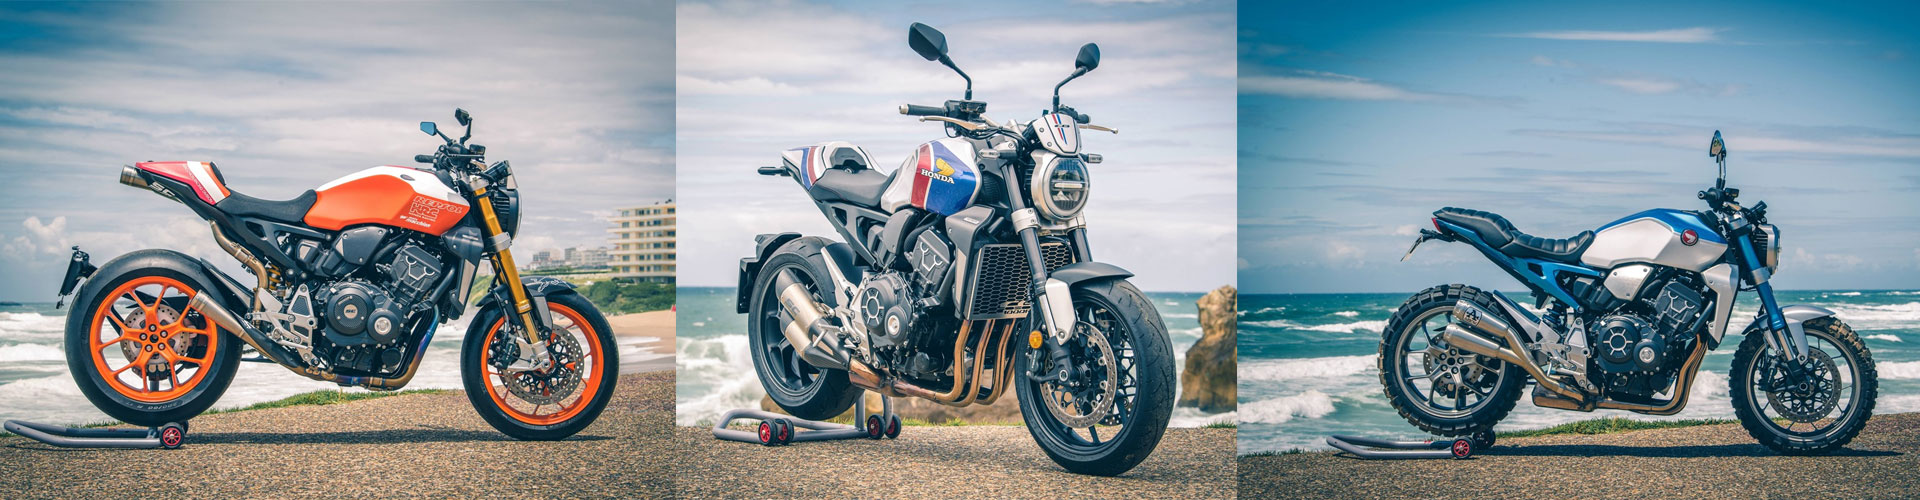 A DOZEN CUSTOMIZED CB1000R'S AT WHEELS AND WAVES 2019